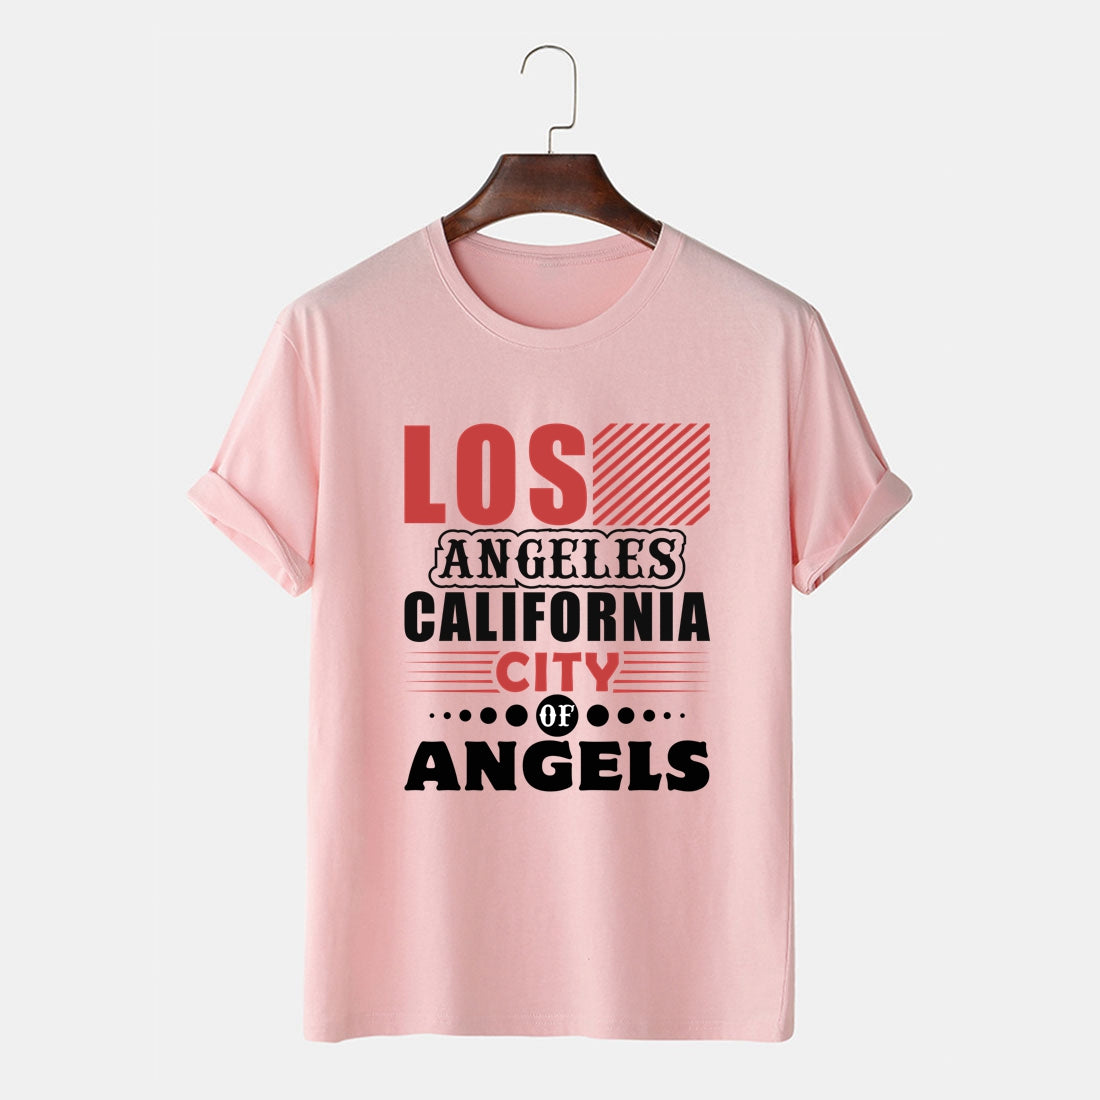 Men's Los Angeles Graphic Print T Shirt City of Angels California Tee Cotton Tops